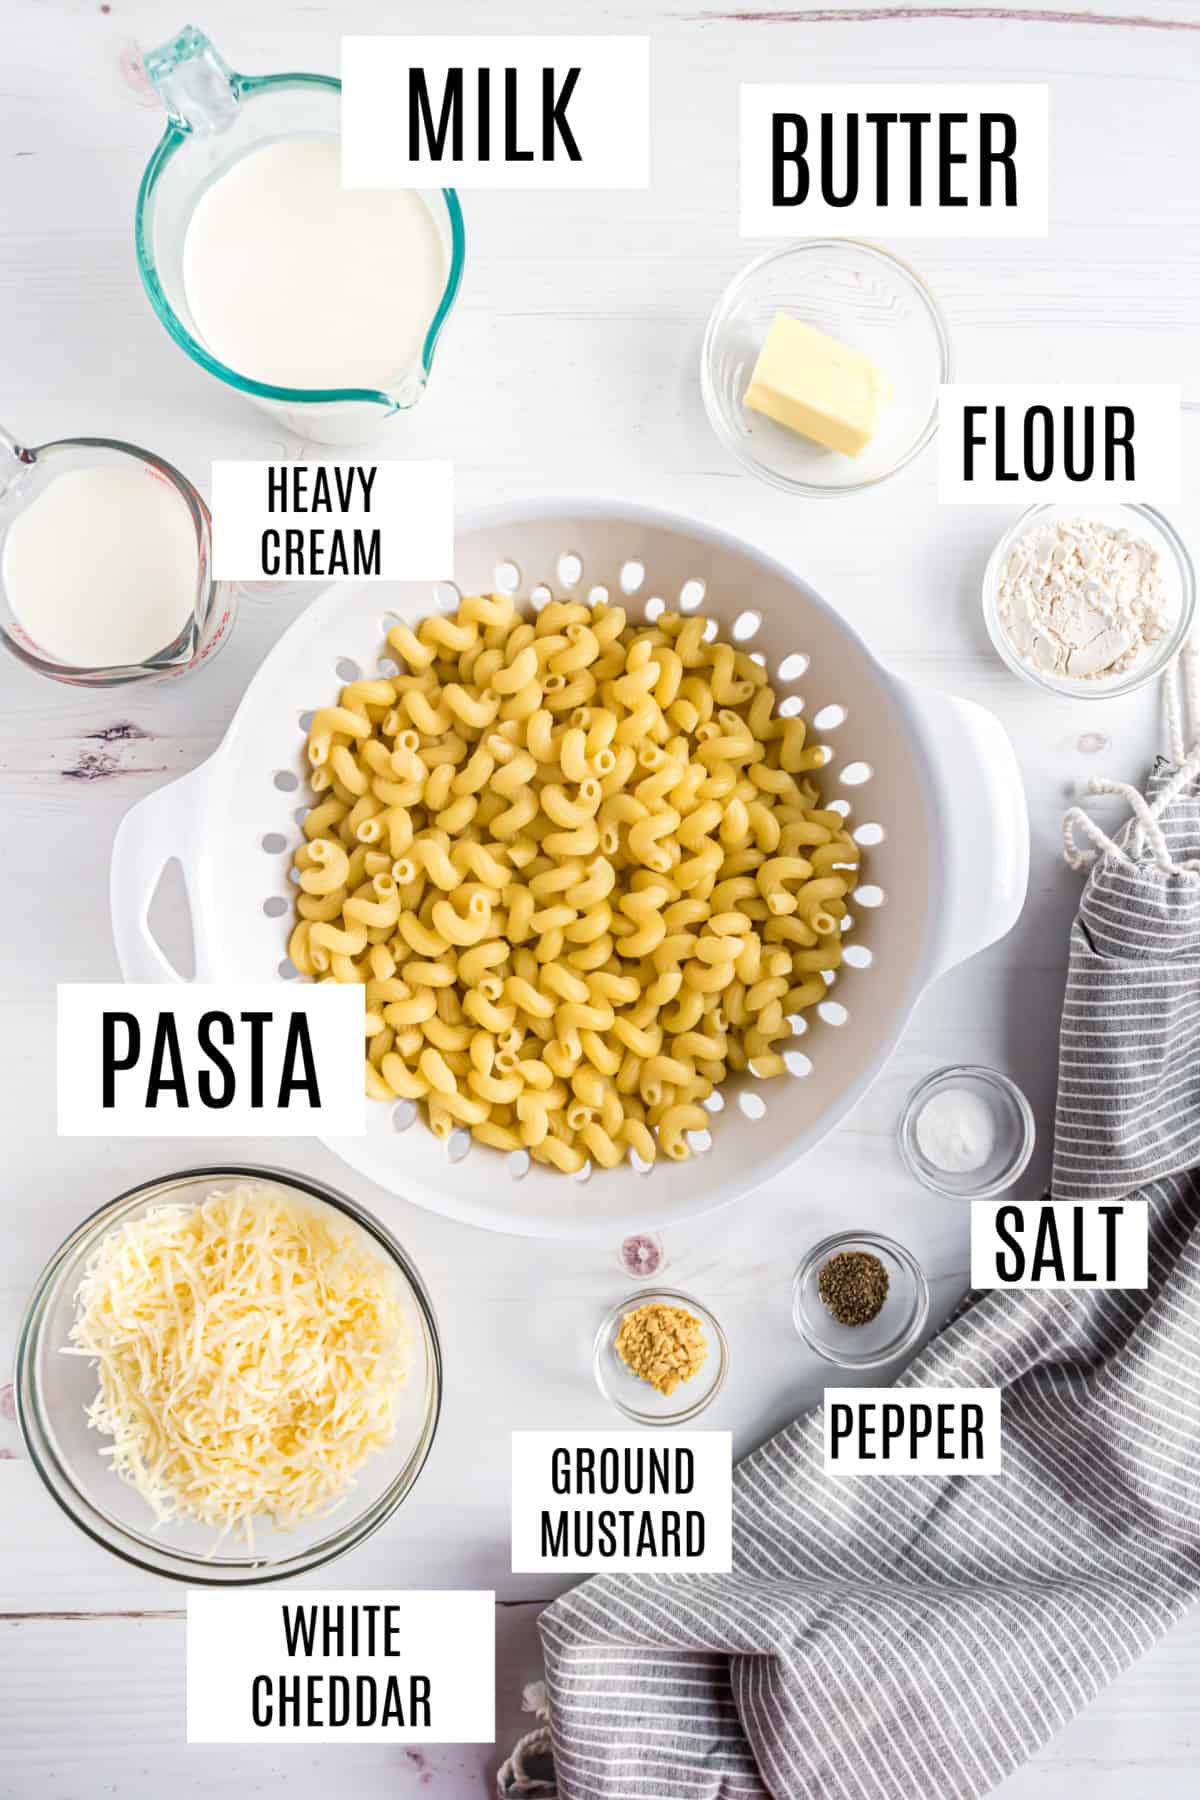 Ingredients needed to make panera mac and cheese.